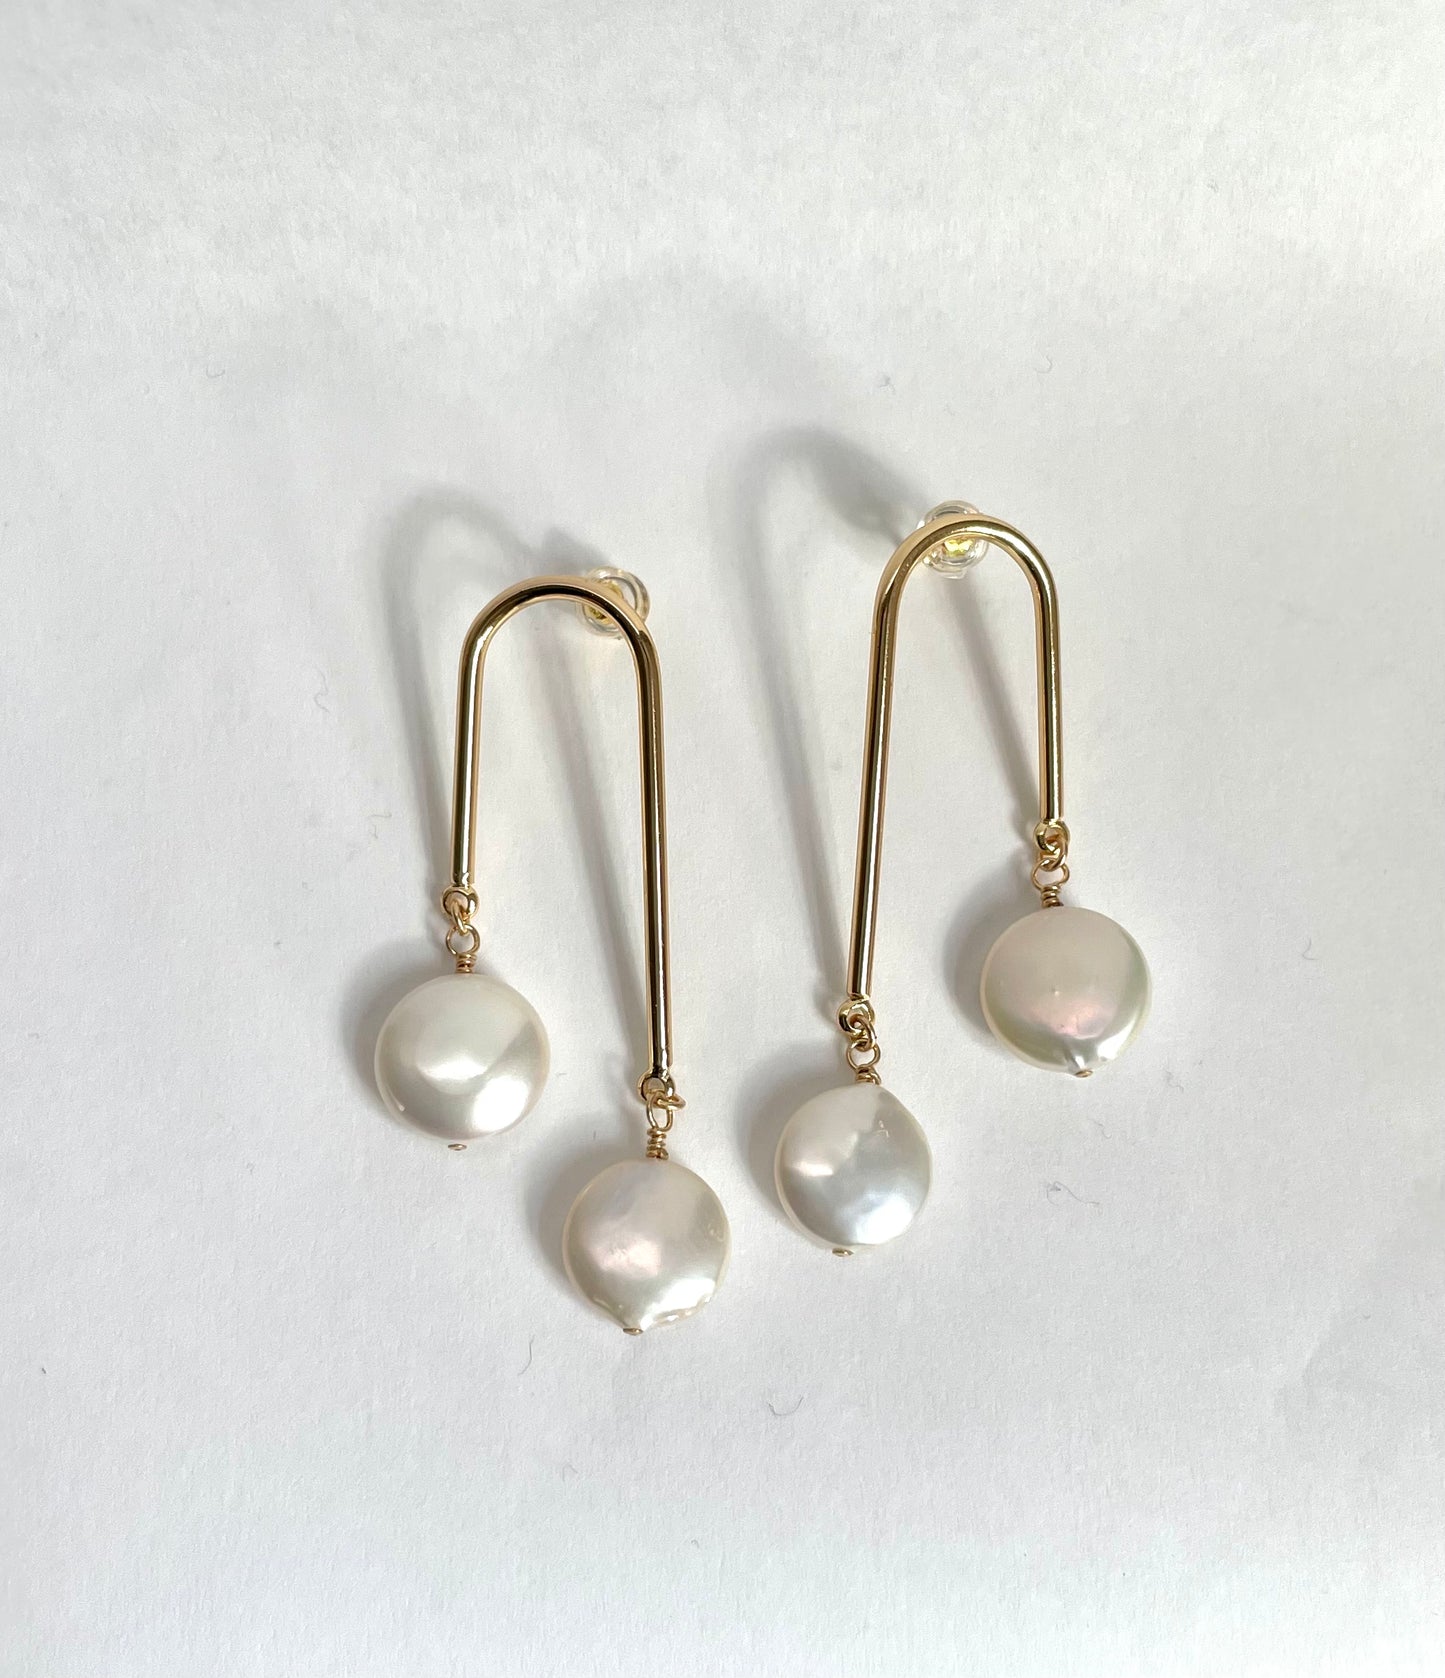 Freshwater coin pearls